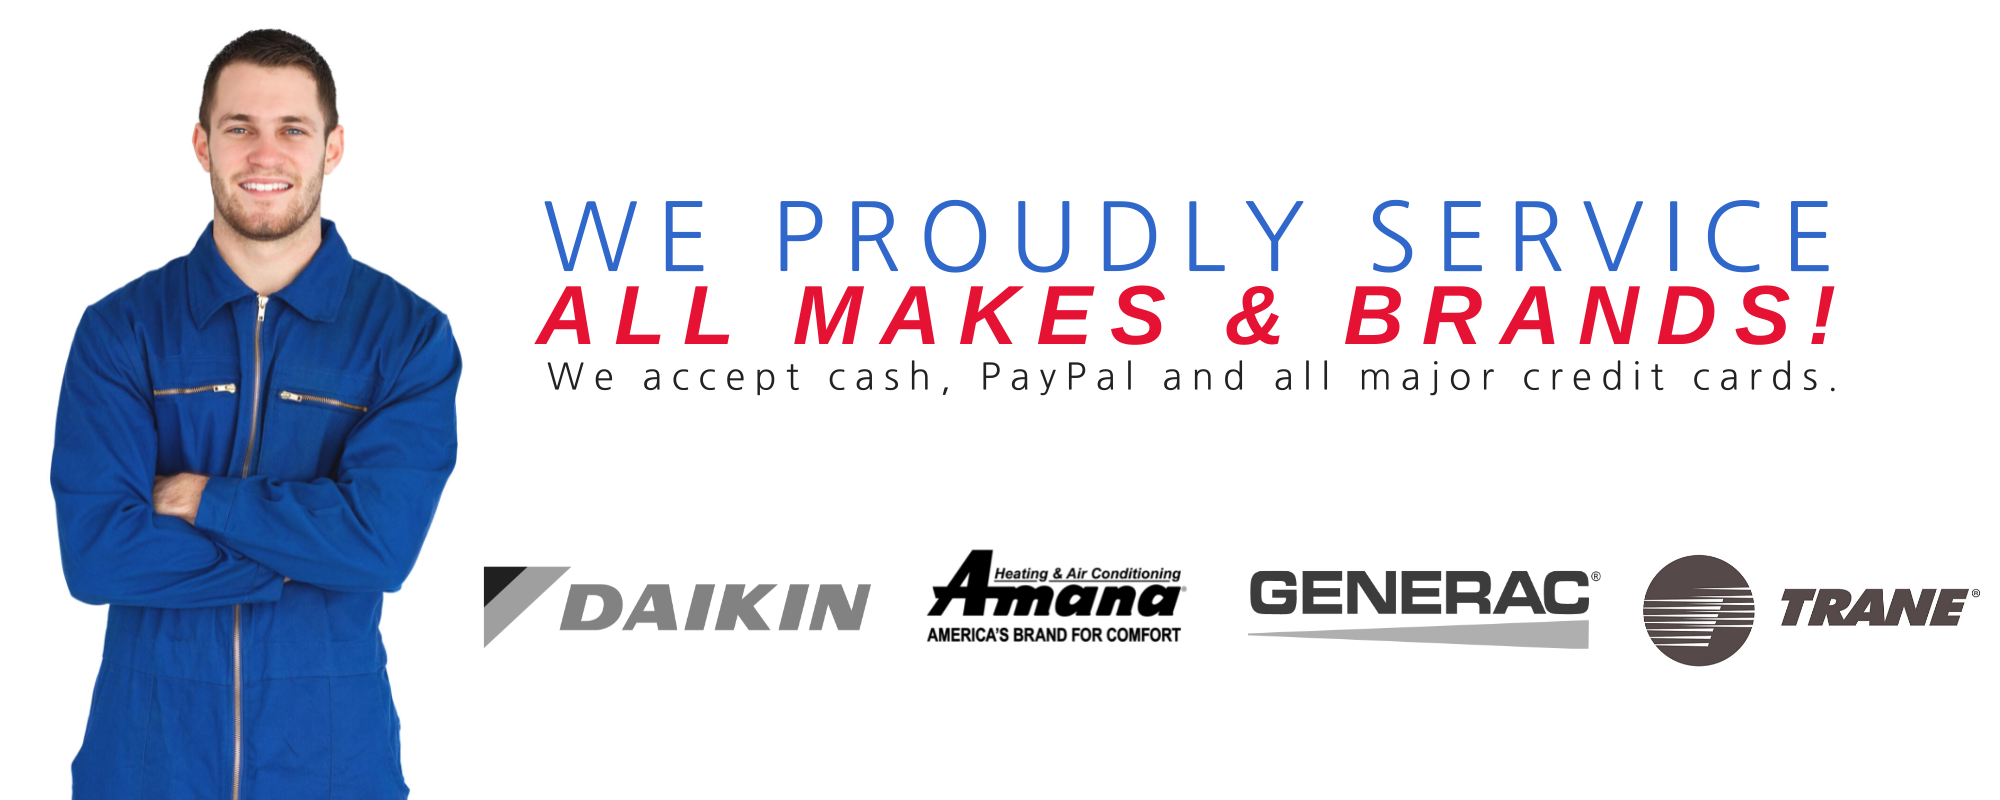 We Proudly Service All Makes & Models!